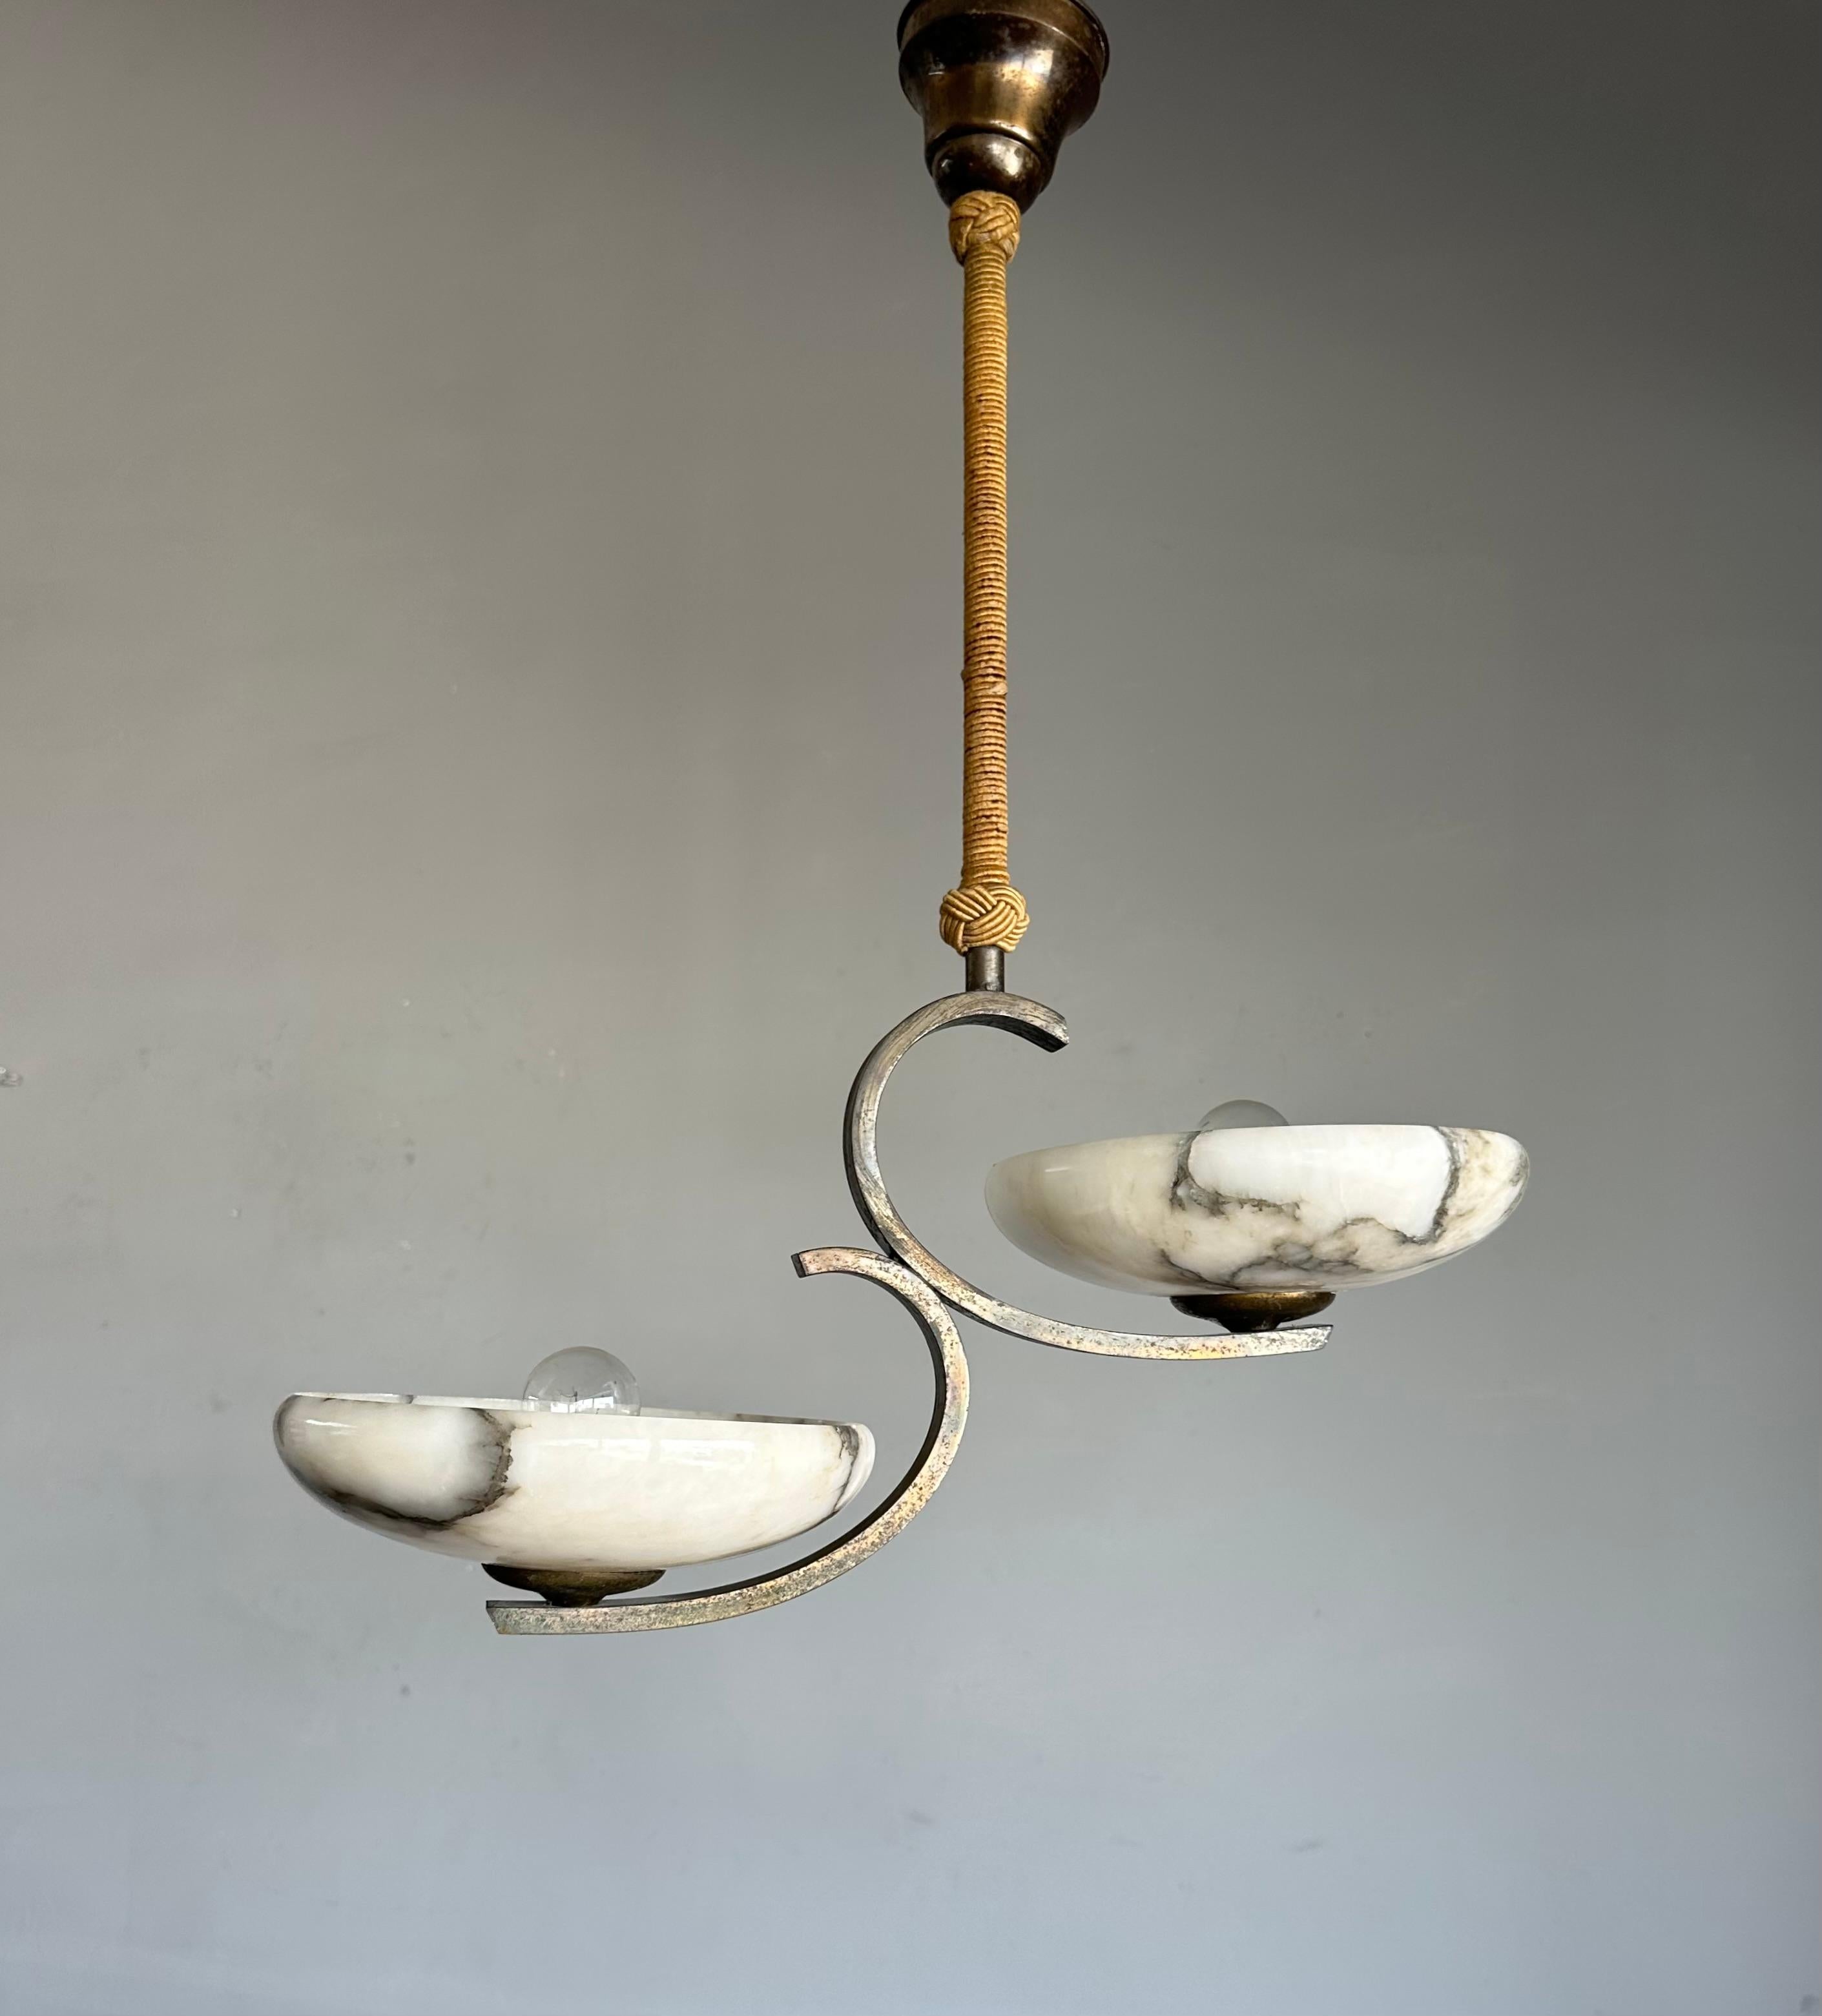 Top Art Deco Design Brass and Two Light Alabaster shades Pendant Light / Fixture For Sale 1